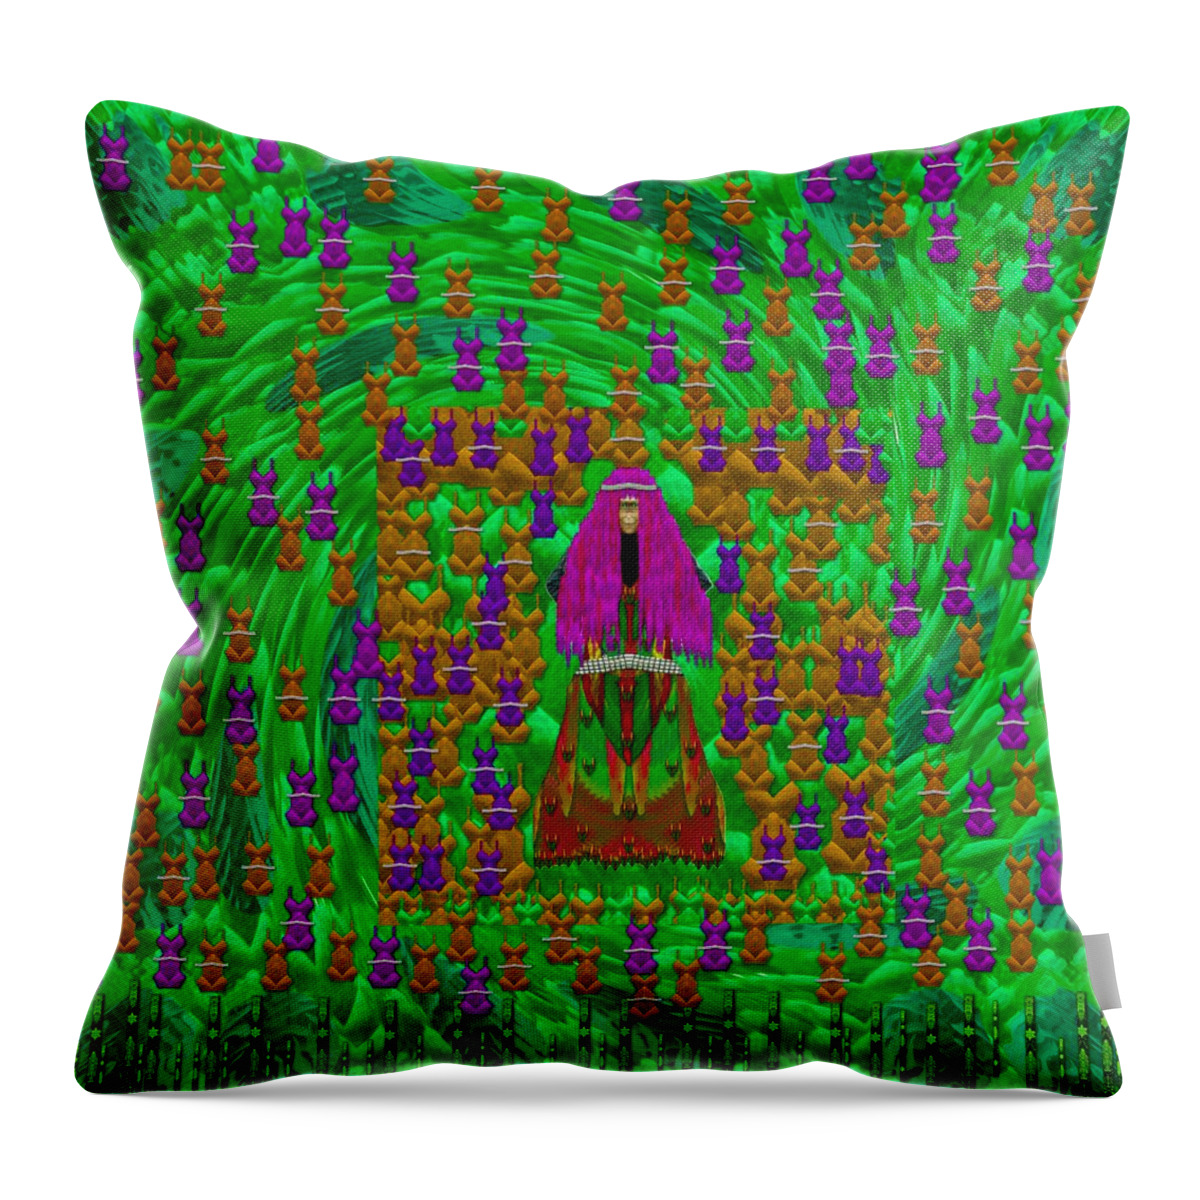 Female Throw Pillow featuring the mixed media Iron Maiden Heavy Metal by Pepita Selles